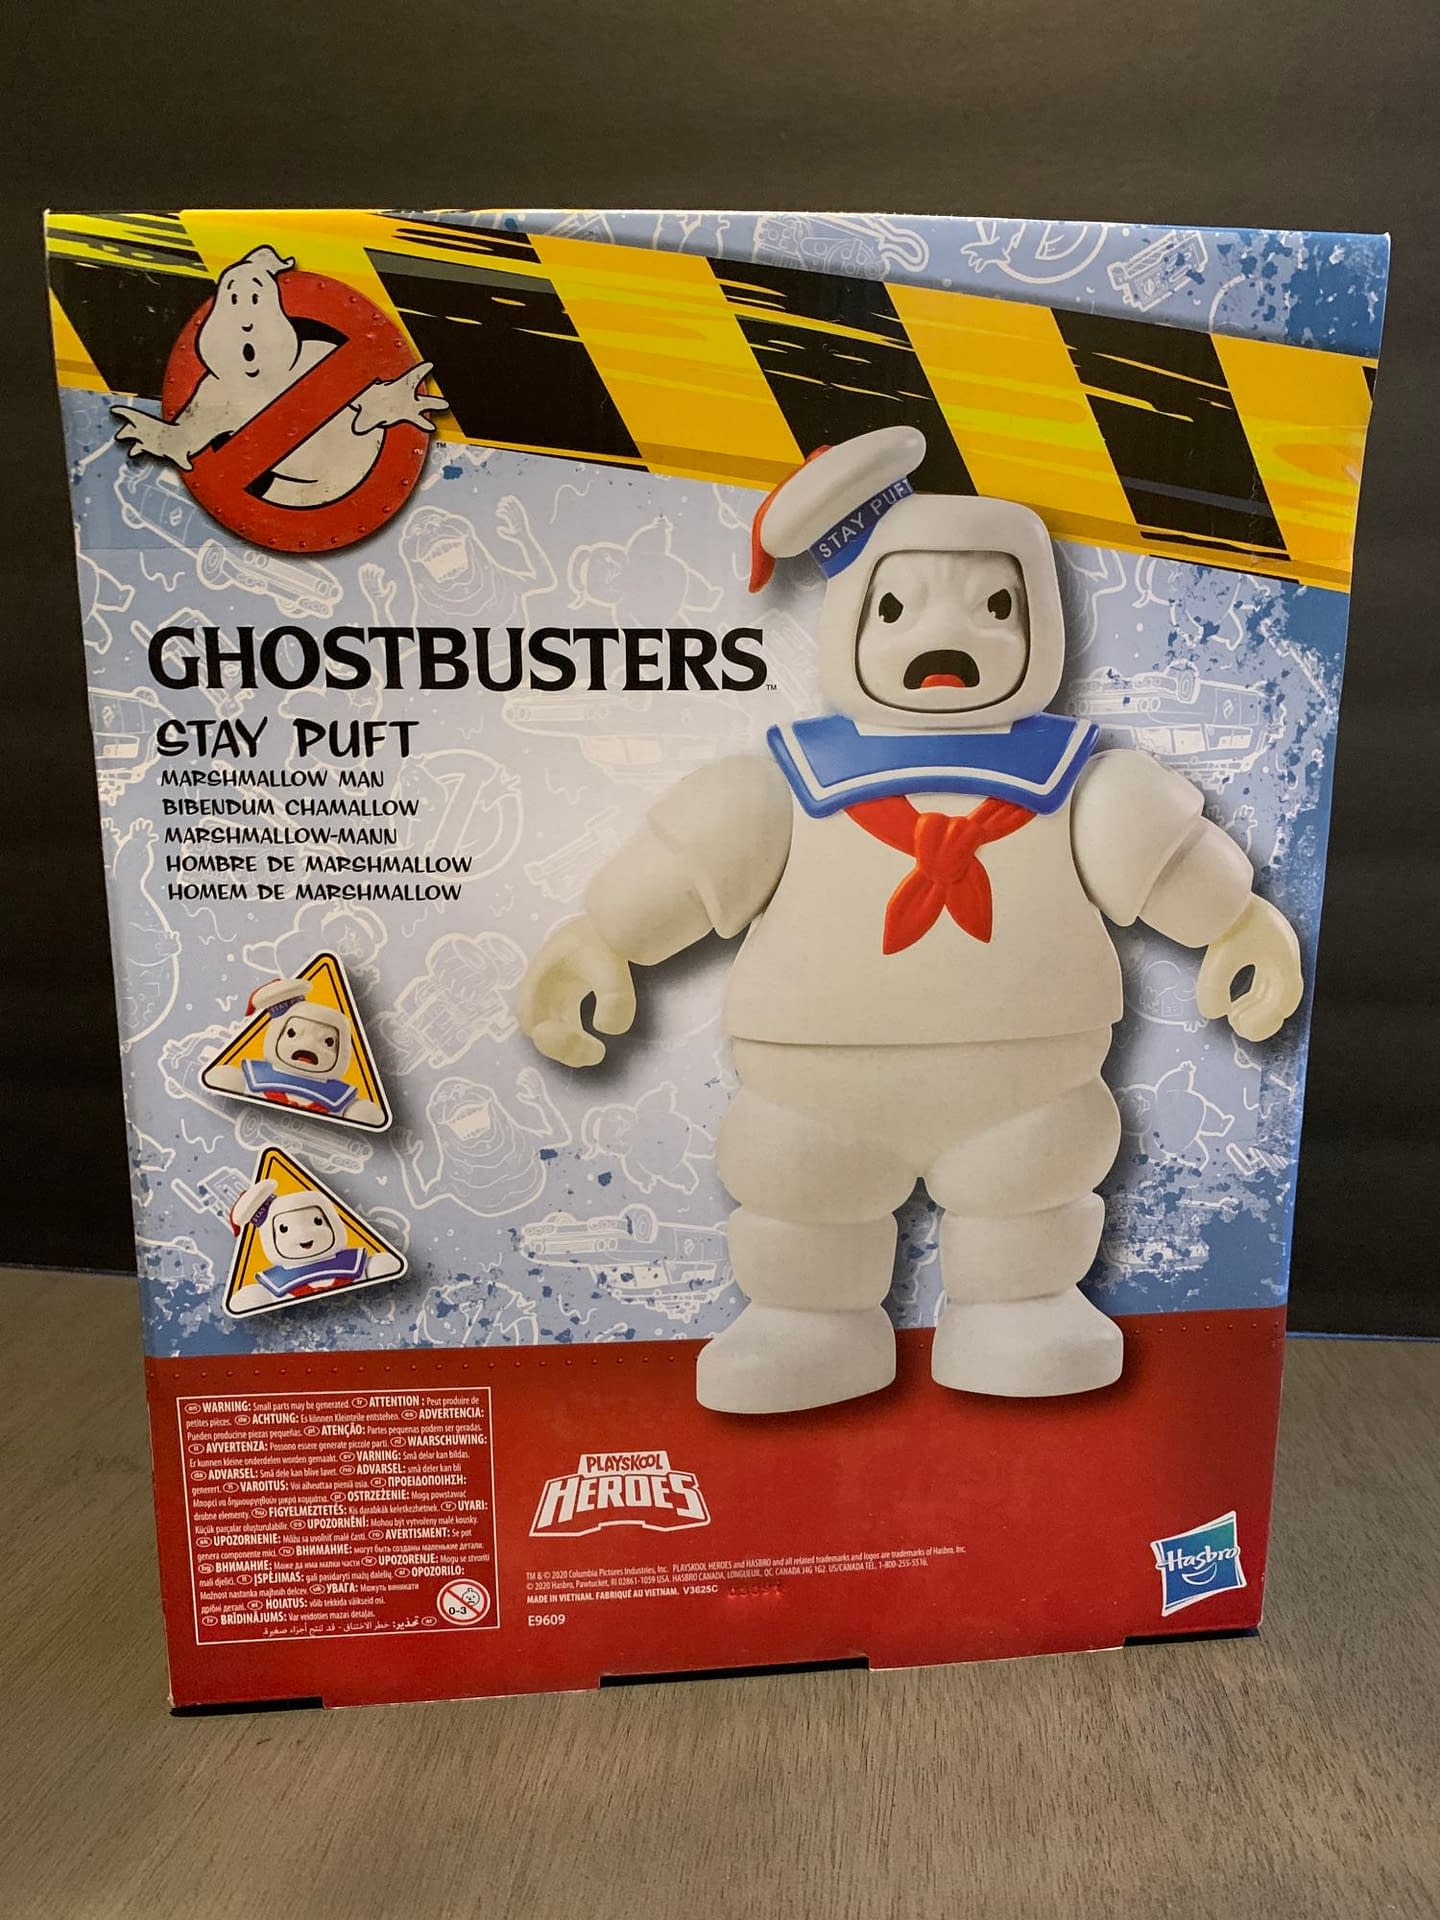 Let's Look At Some New Hasbro Ghostbusters Figures For All Ages